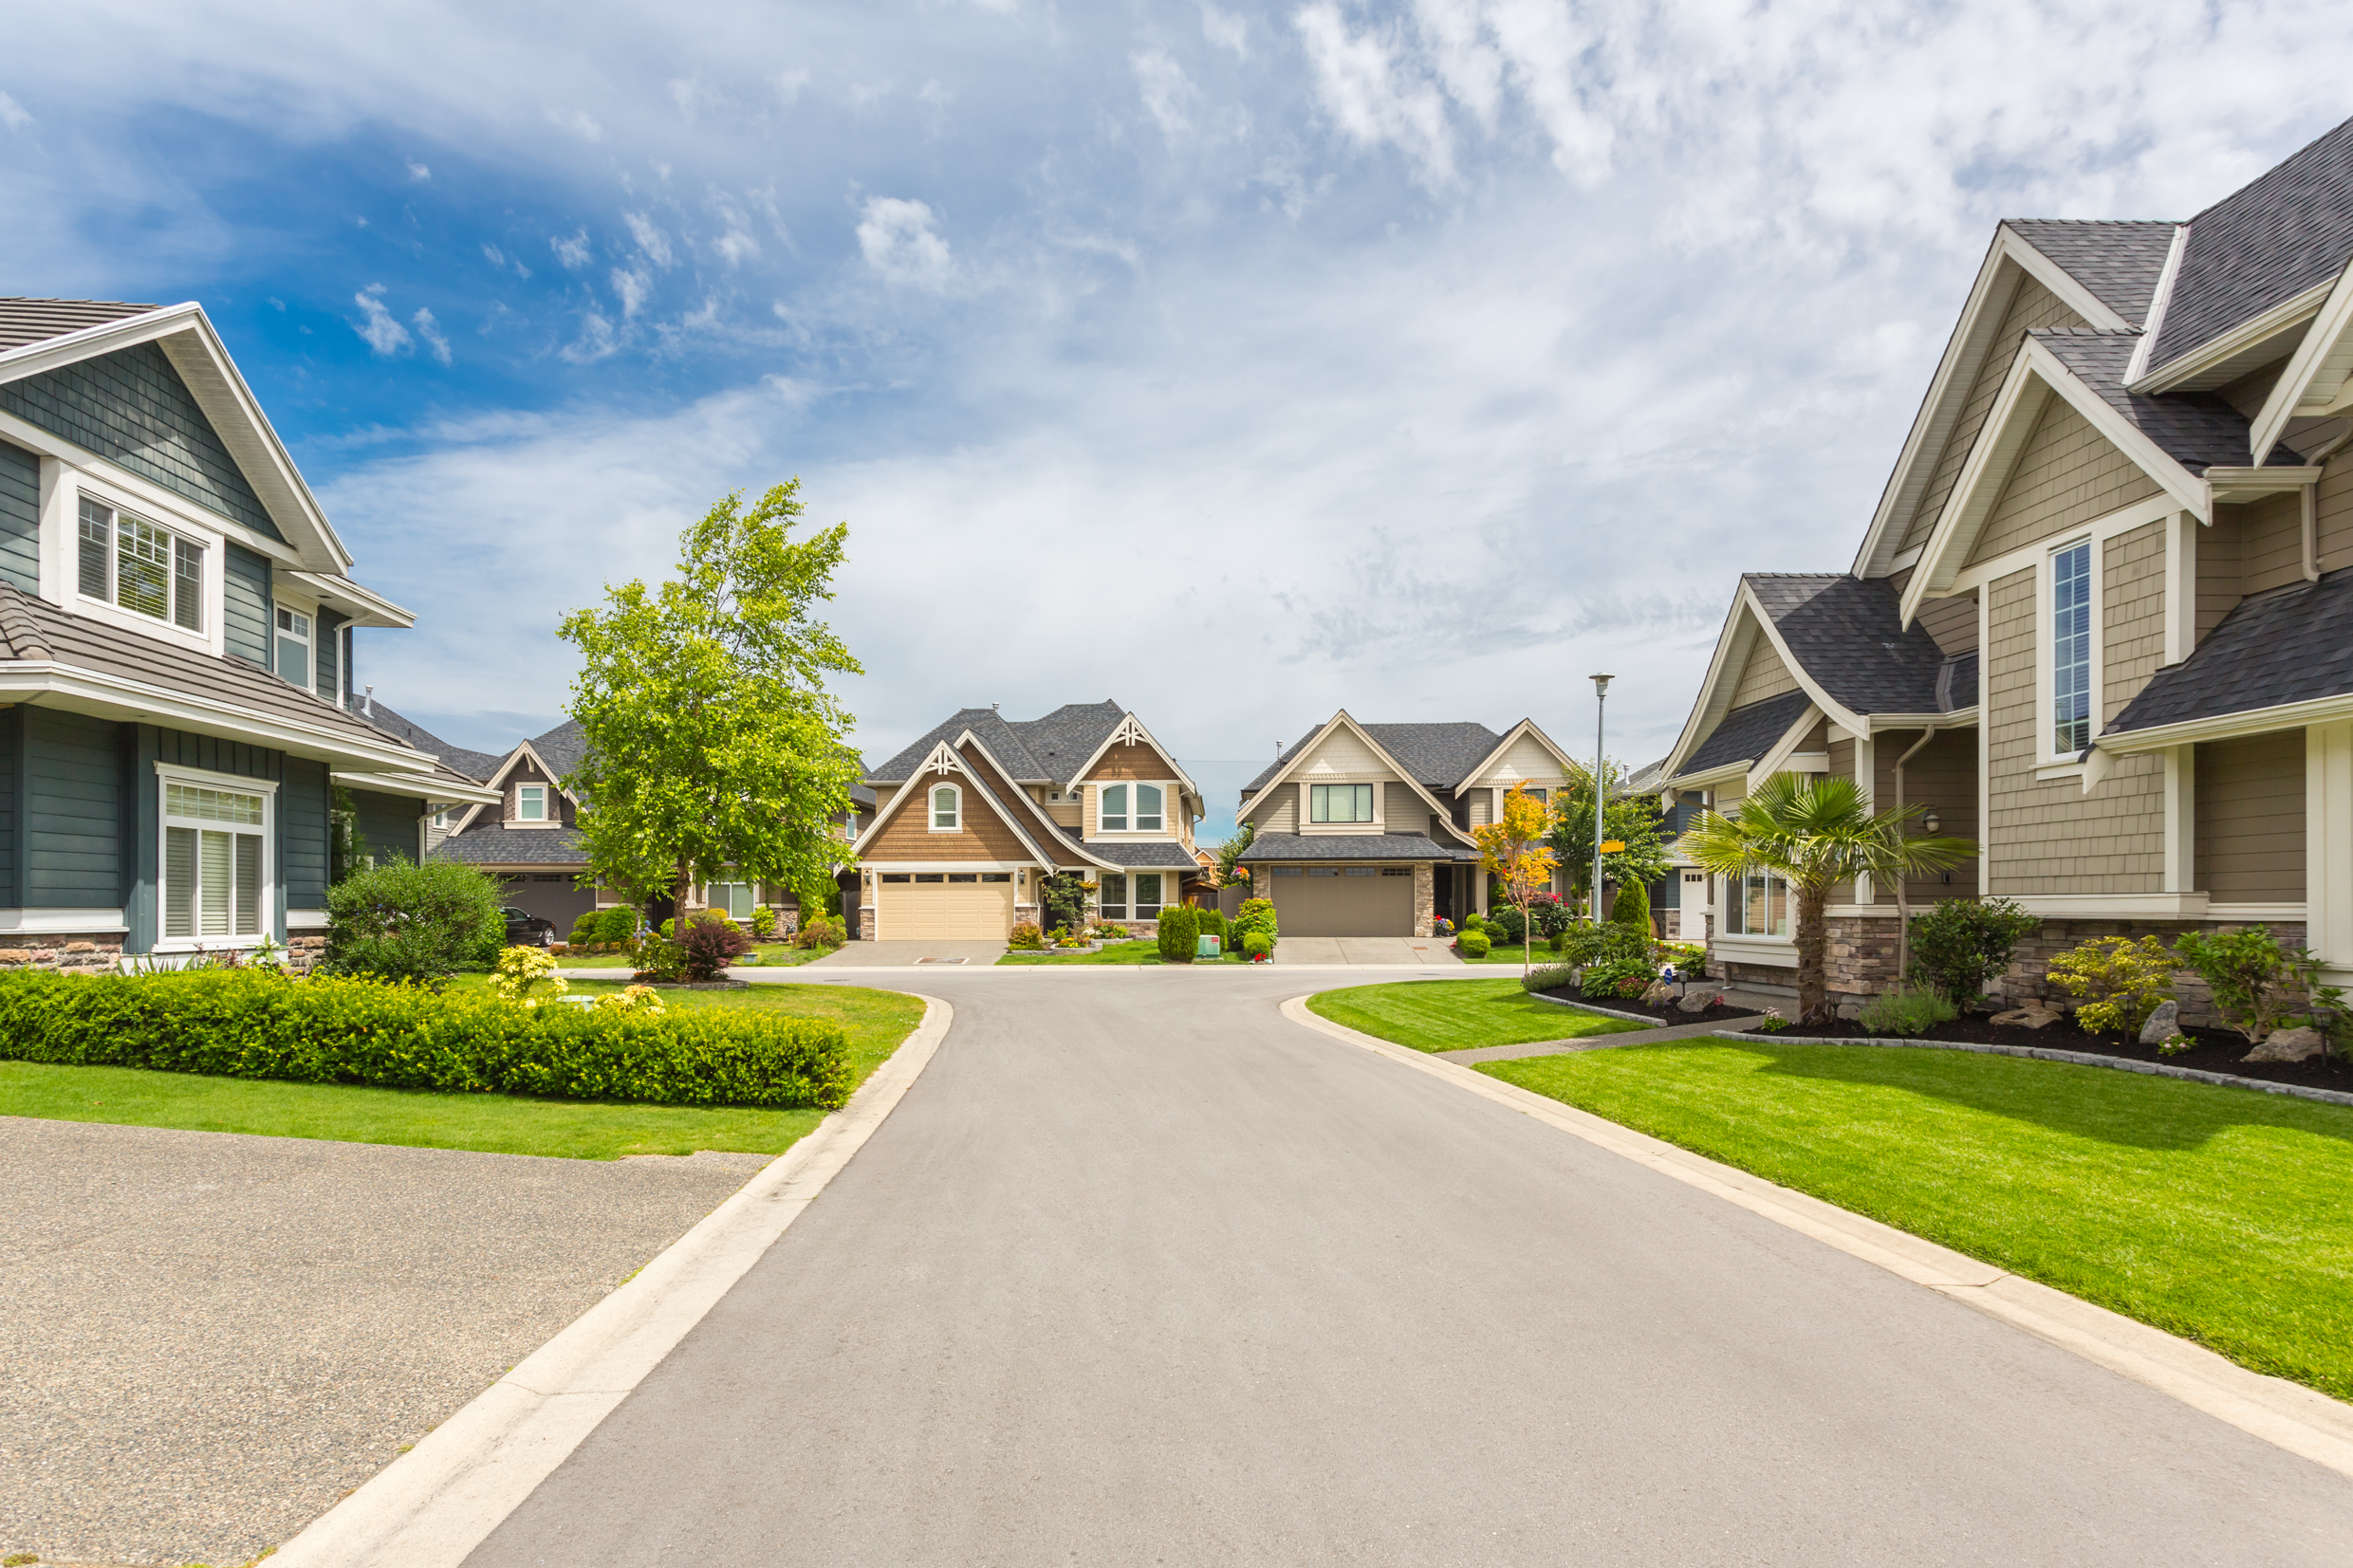 Homes on a suburban street | Source: Shutterstock